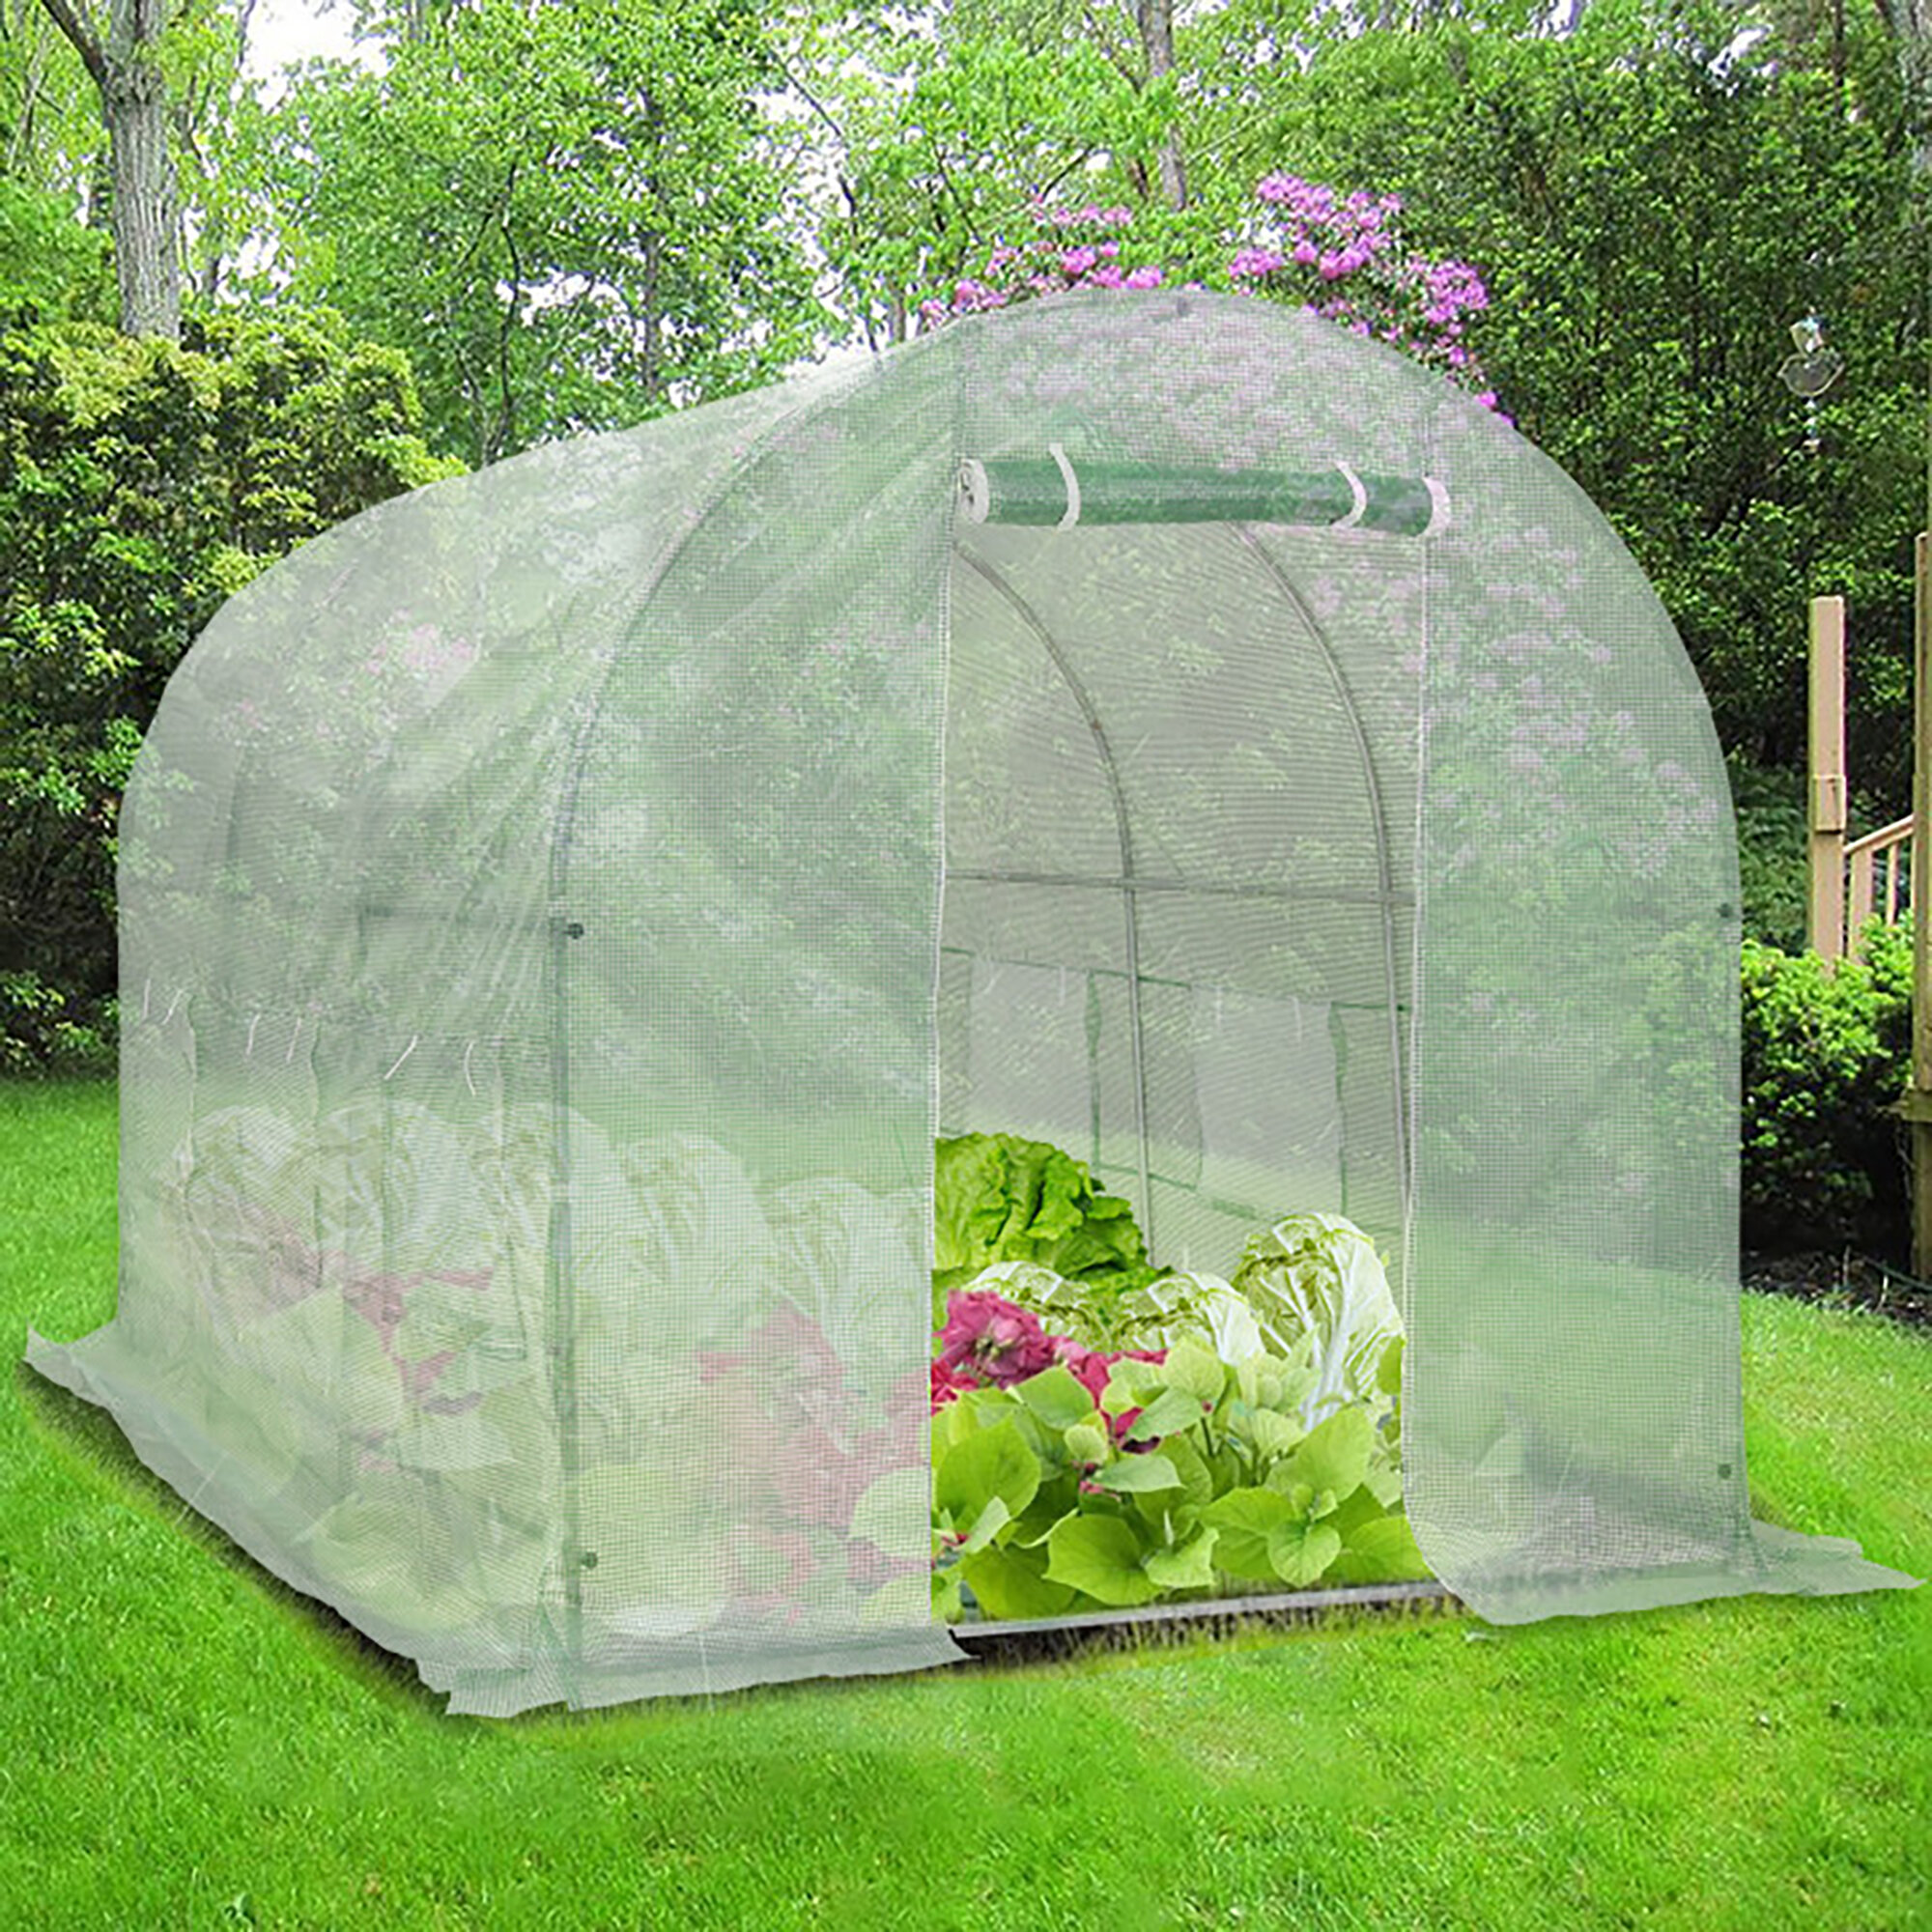 Green　Dual　With　Plant　Galvanized-Steel　Wayfair　Zippered　Canada　Reinforced　Greenhouse　Duty　Screen　Screen　Heavy　Windows,　With　Walk-In　Frame　GDY　House　7'X12'X7'　Doors